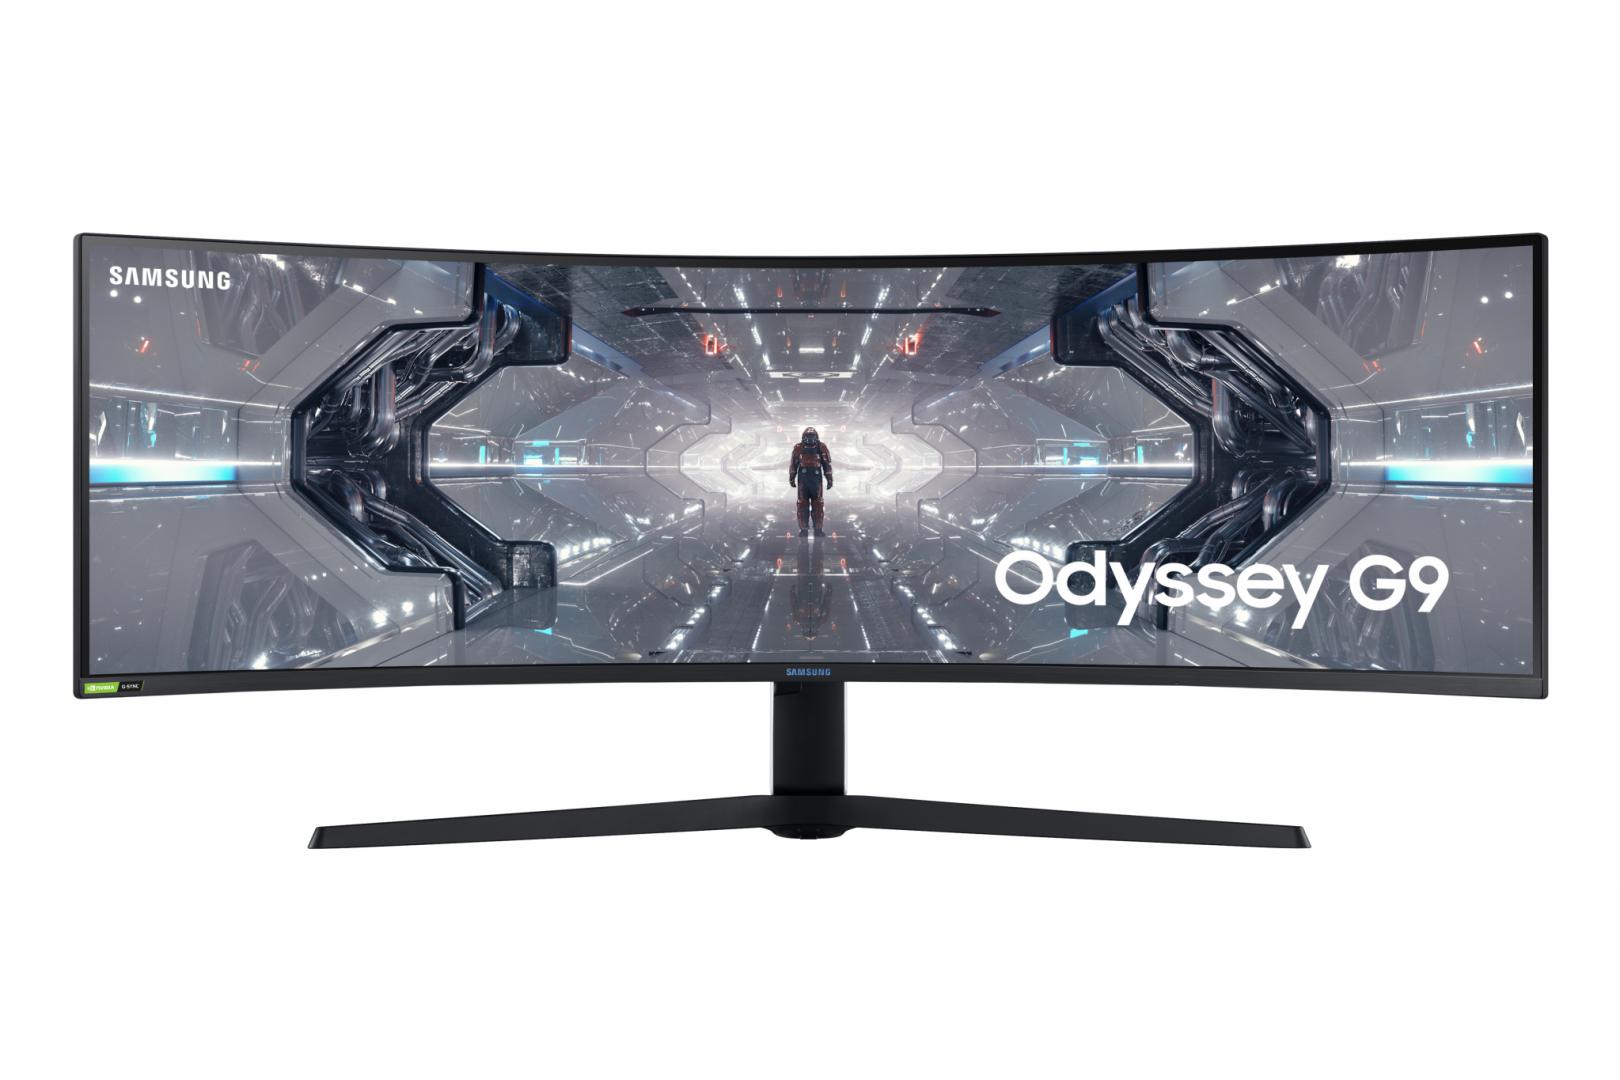 MONITOR SAMSUNG LC49G95TSSPXEN 49 inch, Curvature: 1000R , Panel Type:VA, Backlight: LED backlight, Resolution: 5120x1440, Aspect Ratio: 32:9,Refresh Rate:240Hz, Response time GtG: 1 ms, Brightness: 300 cd/m² ,Contrast (static): 2500:1, Contrast (dynamic): Mega DCR, Viewing angle:178°/178°, Color